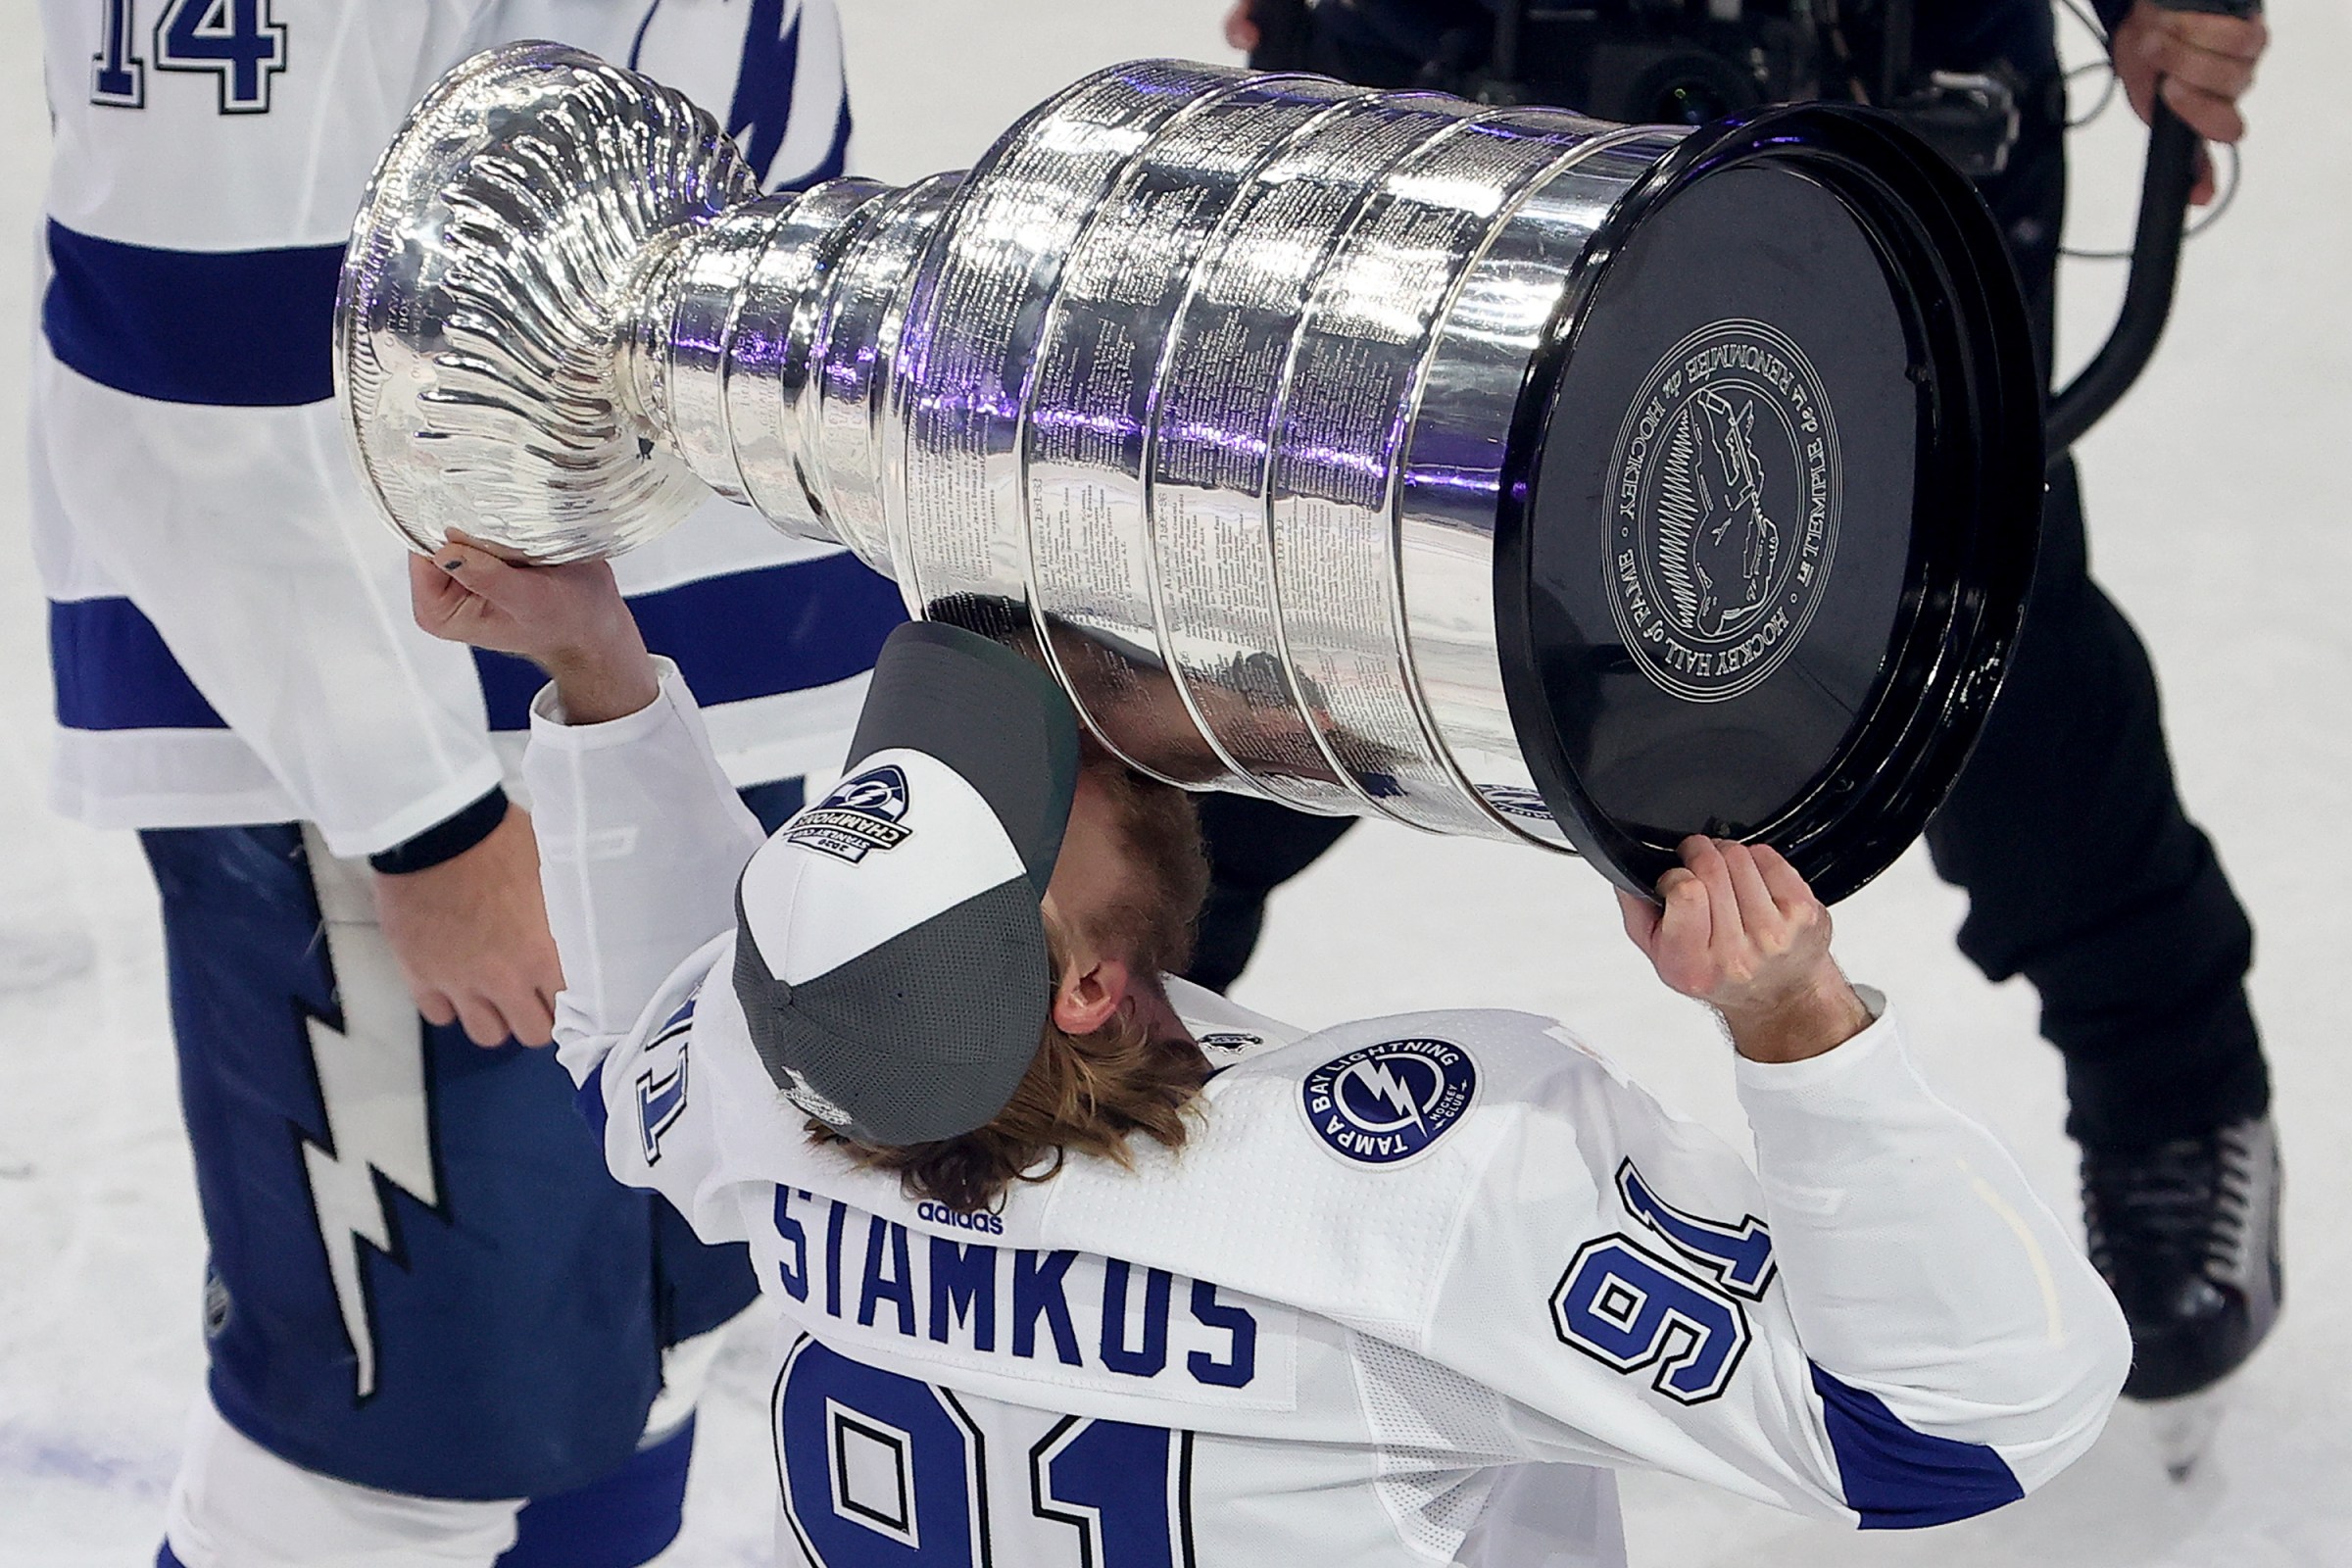 Steven Stamkos #91 of the Tampa Bay Lightning skates with the Stanley Cup following the series-winning victory over the Dallas Stars